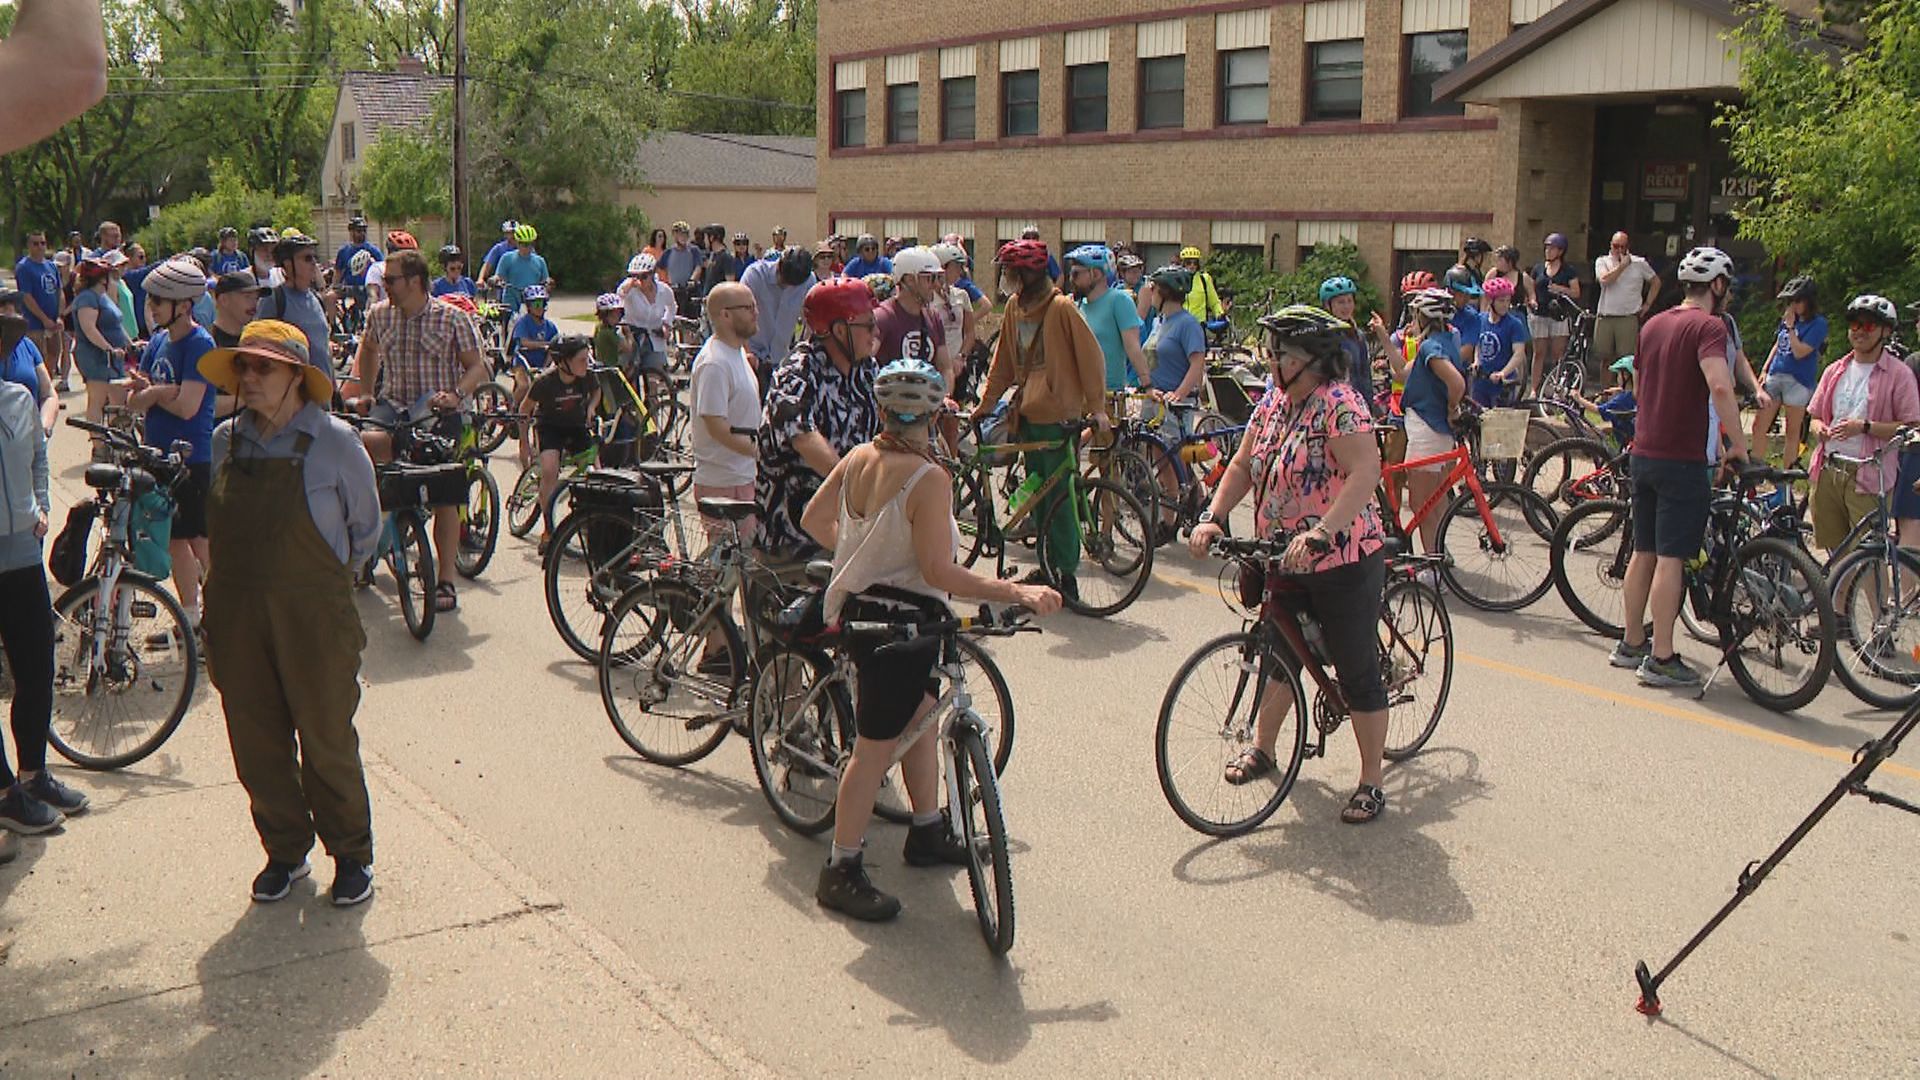 Ride For Your Life event draws hundreds to Saskatoon streets in rally for change